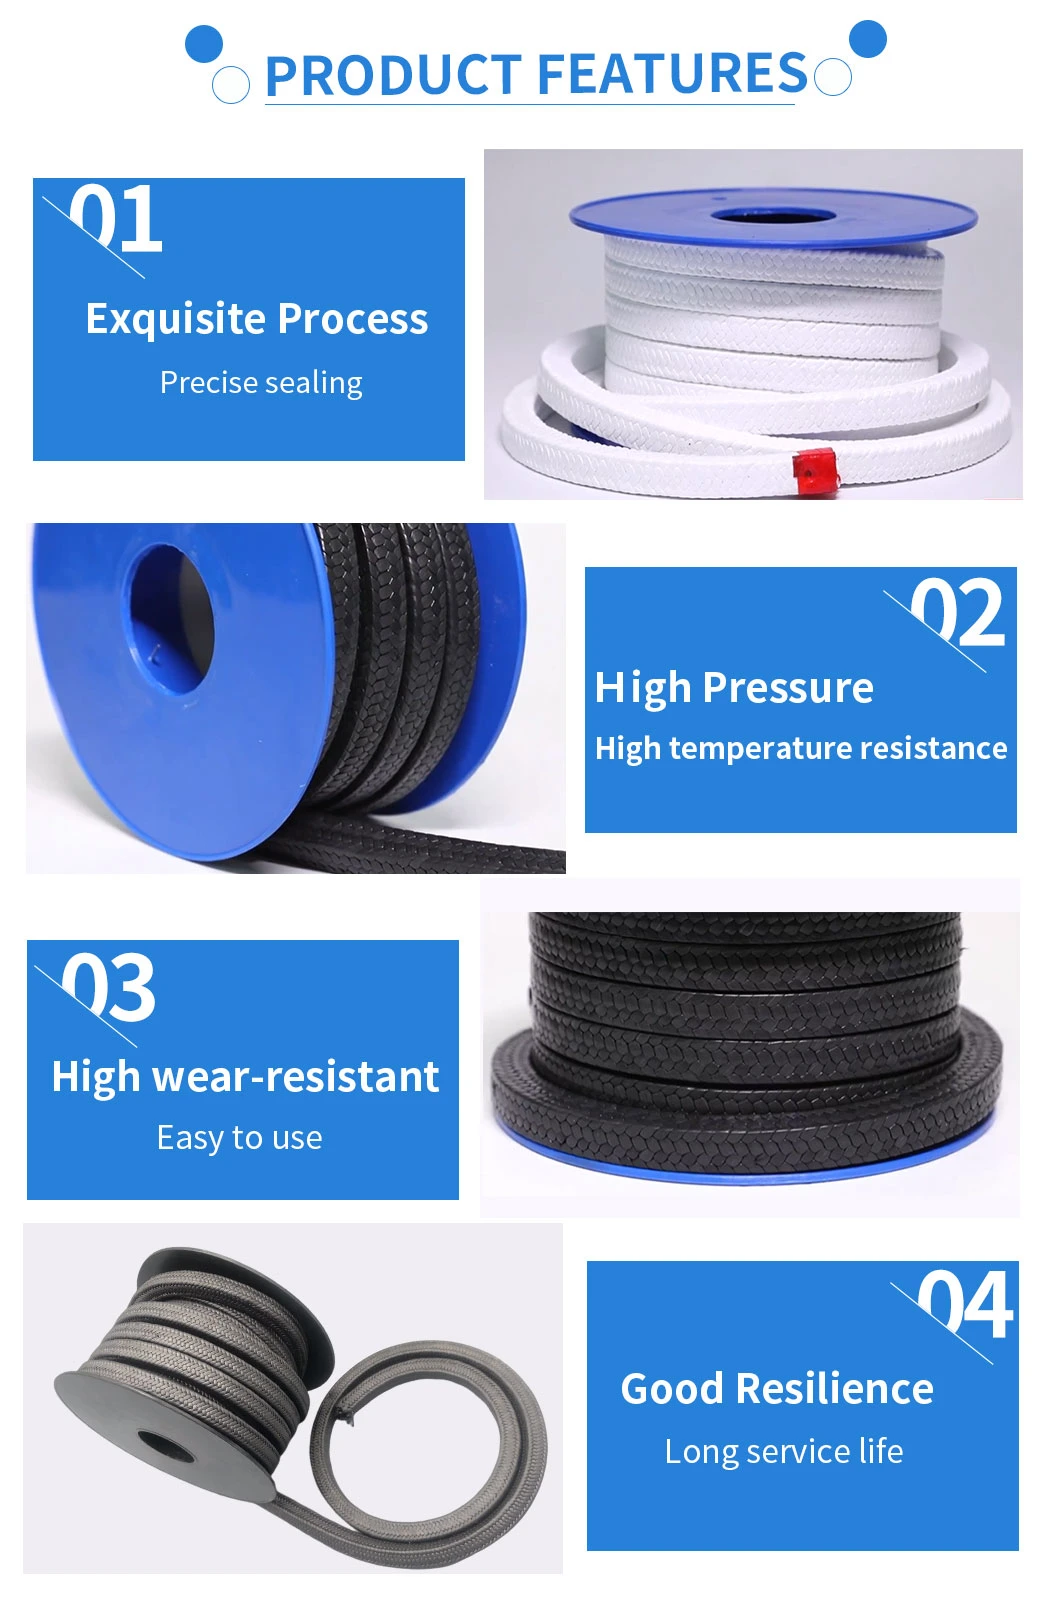 China High Temperature Resistance Gland Packing Security Seal Aramid Fiber Gland Packing with PTFE Emulsion